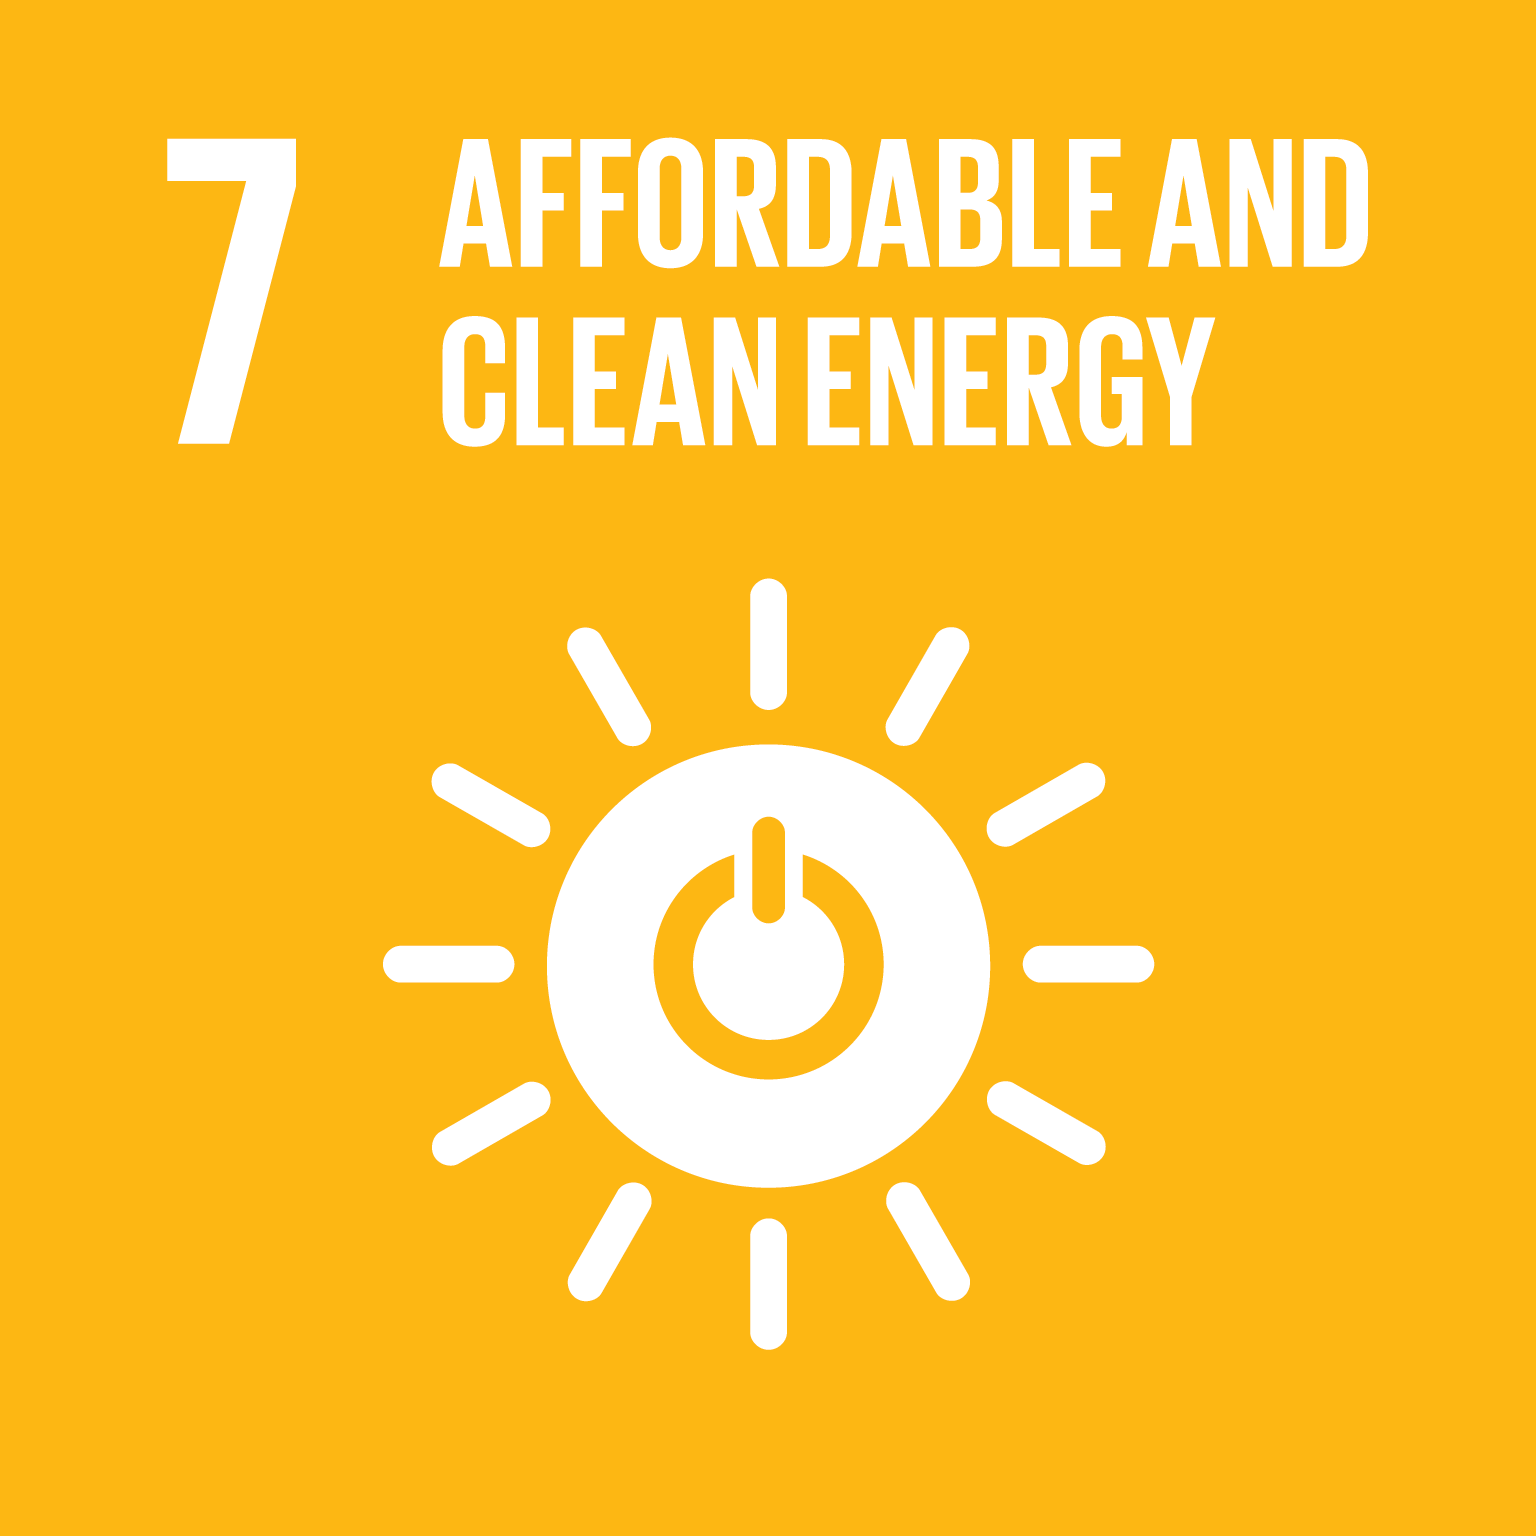 7 - affordable and clean energy